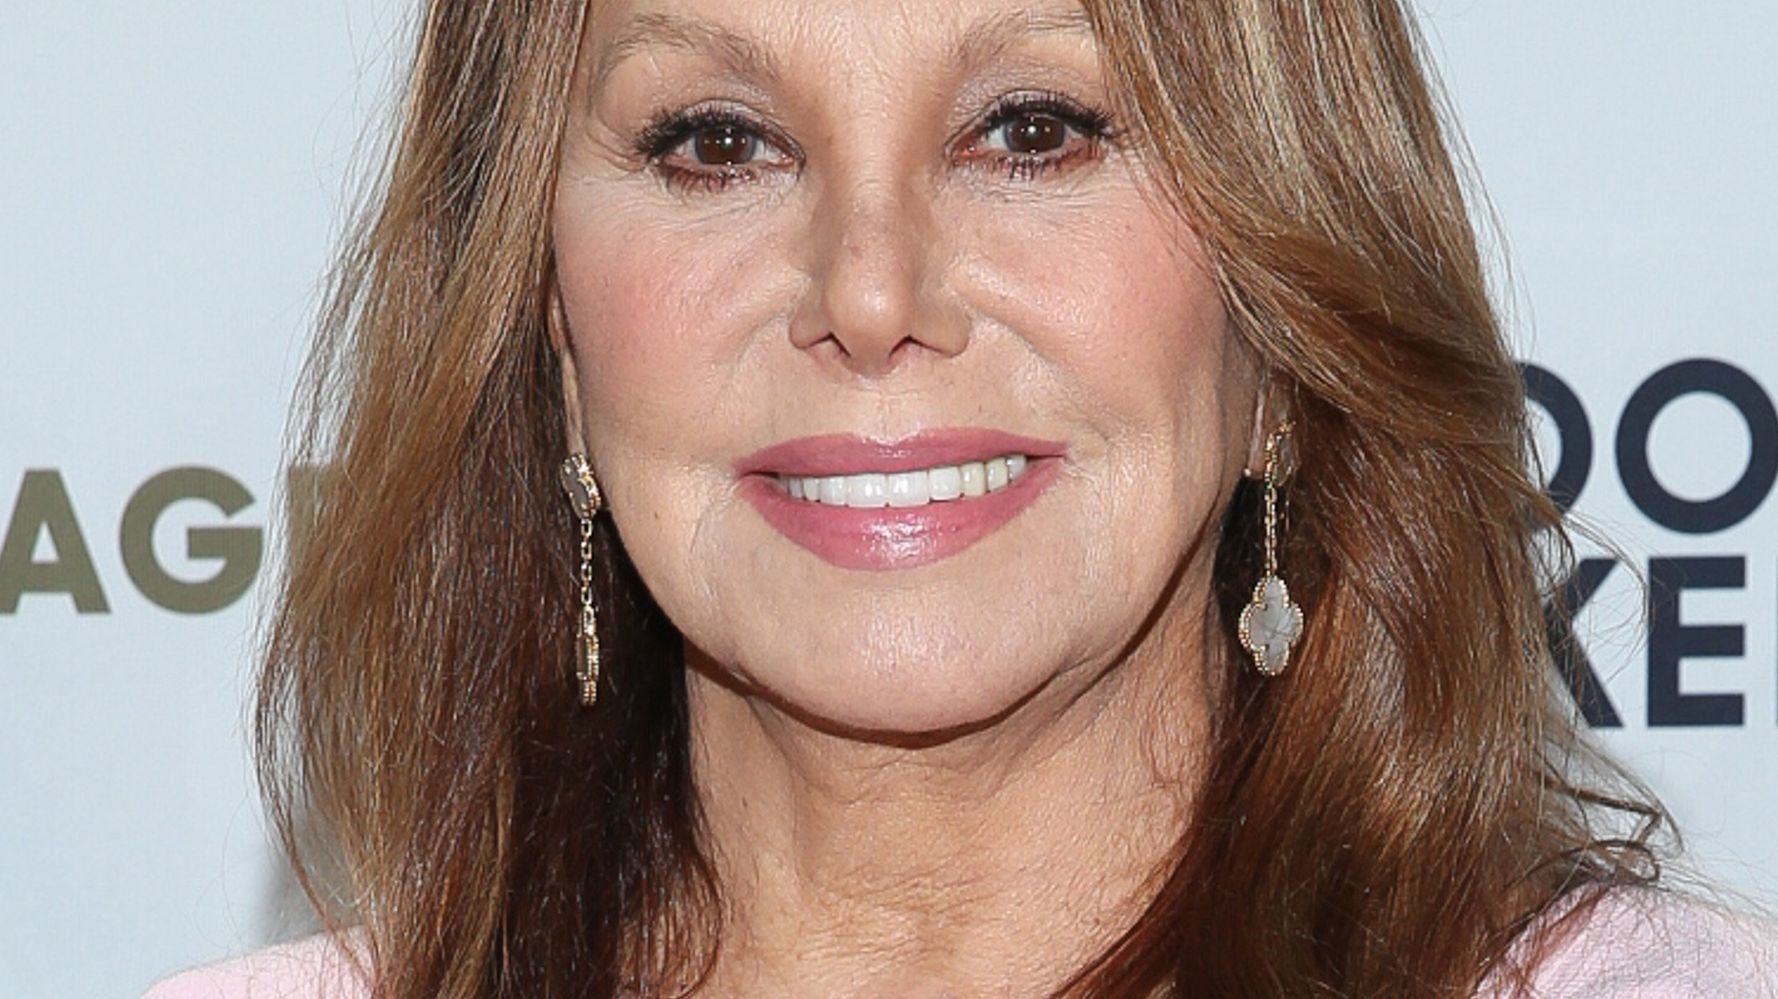 Marlo Thomas On Sex And Why She No Longer Worries About